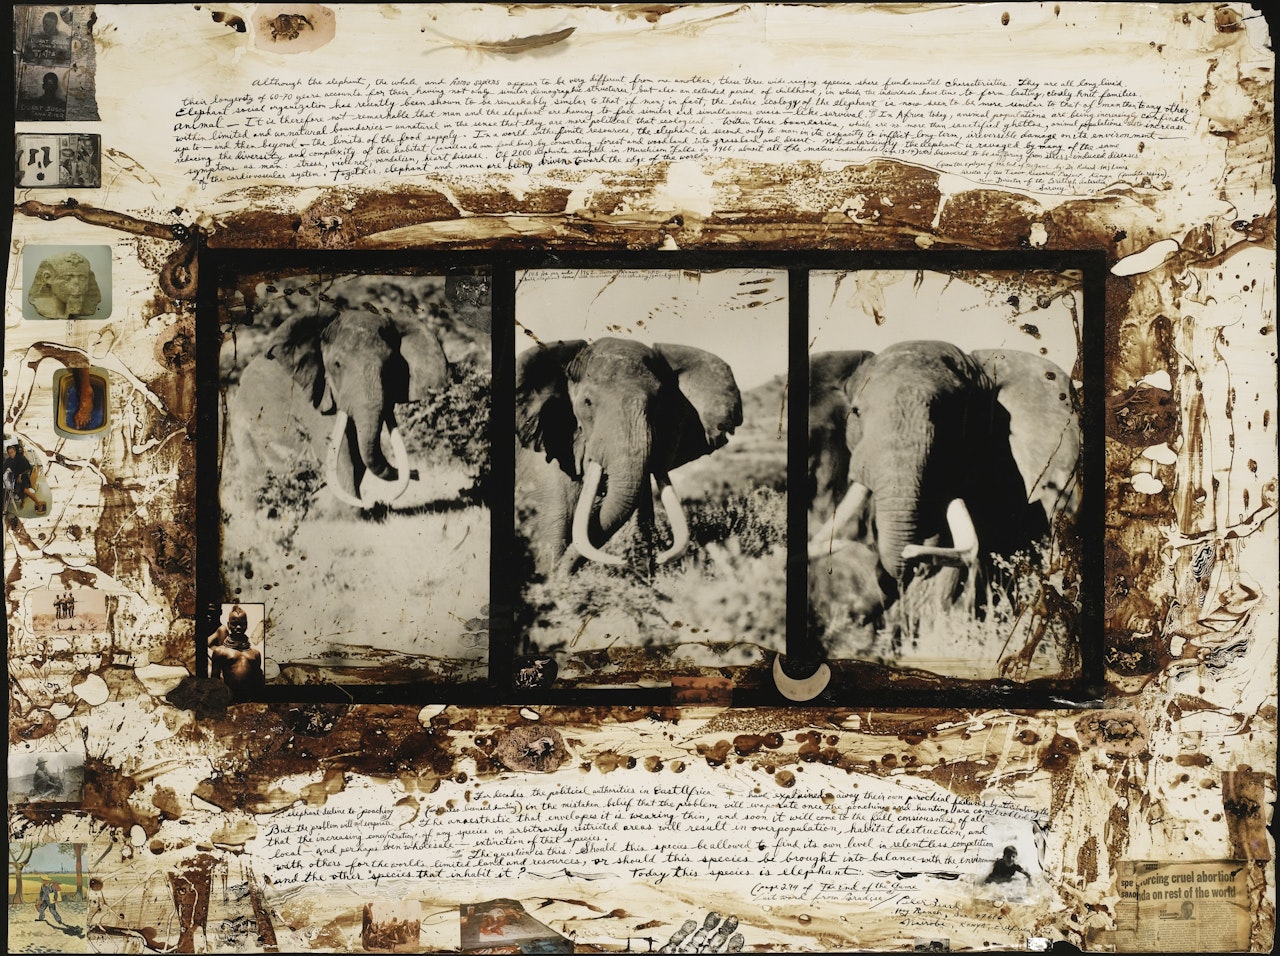 AHMED TRIPTYCH, MARCH 1962 by Peter Beard